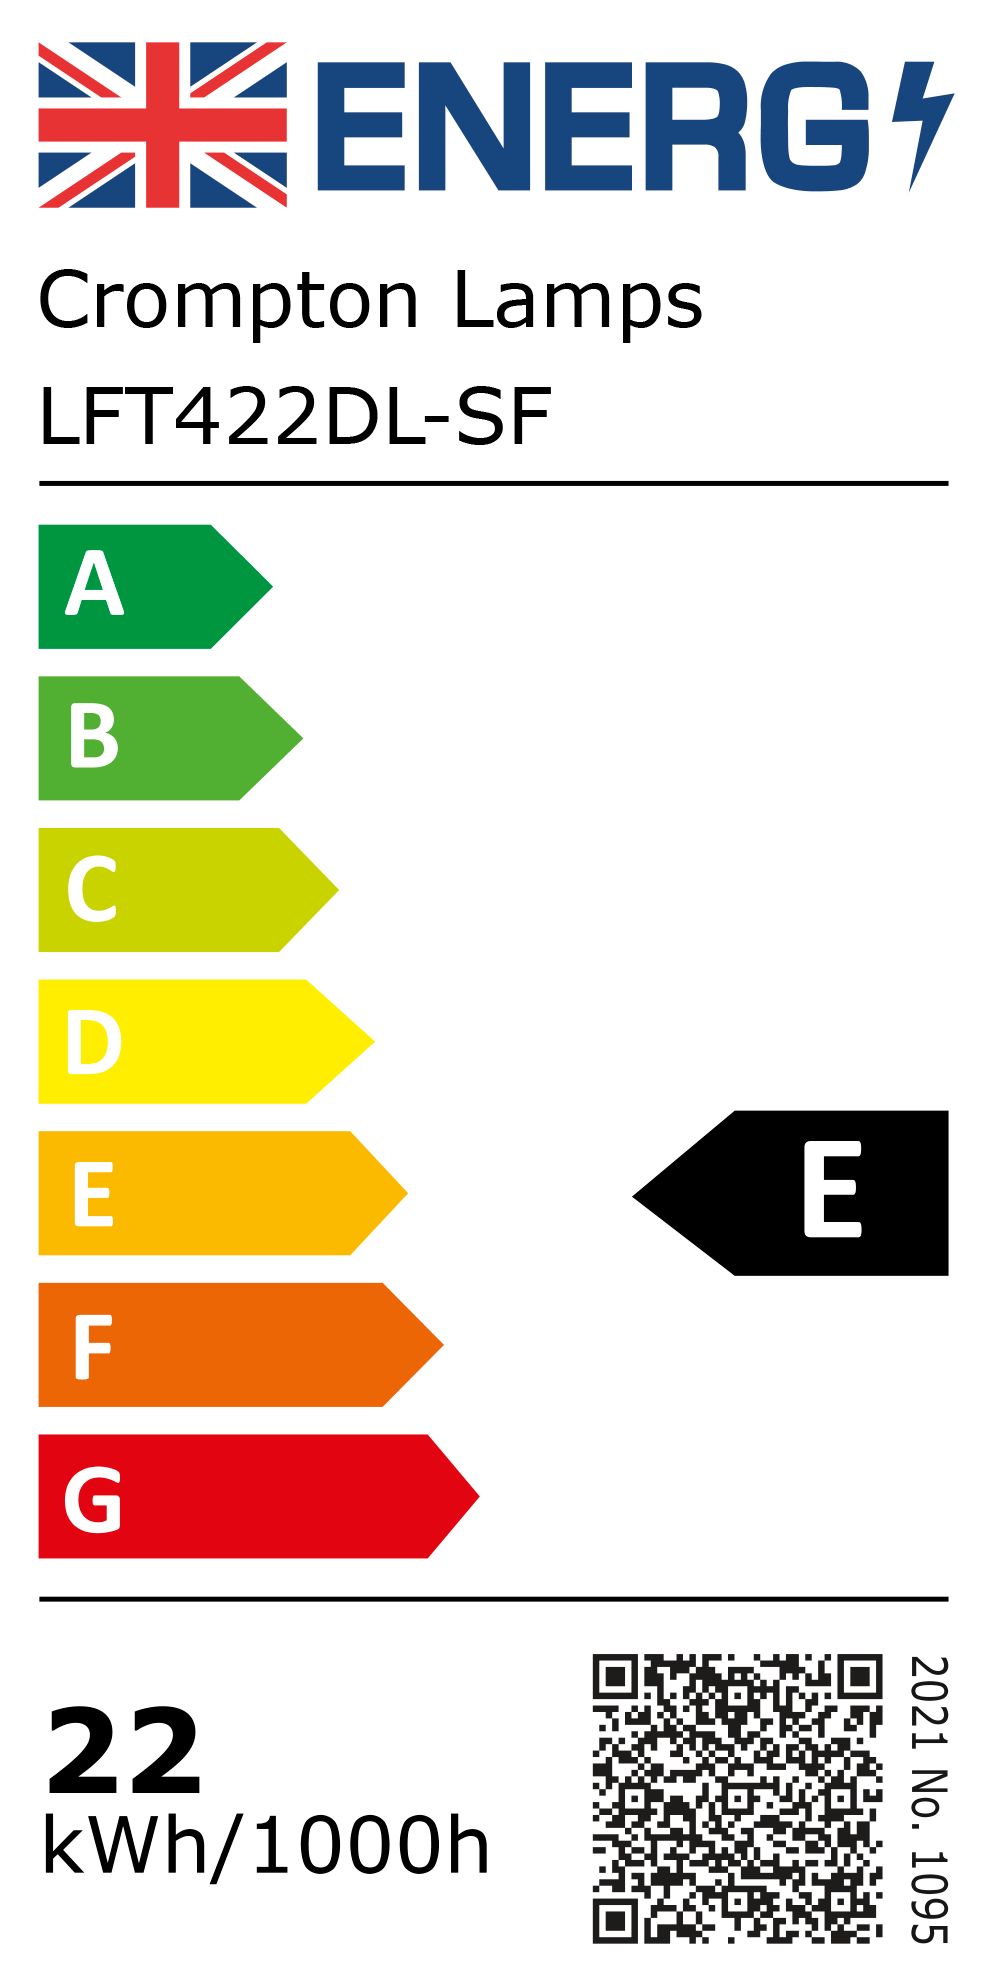 New 2021 Energy Rating Label: Stock Code LFT422DL-SF